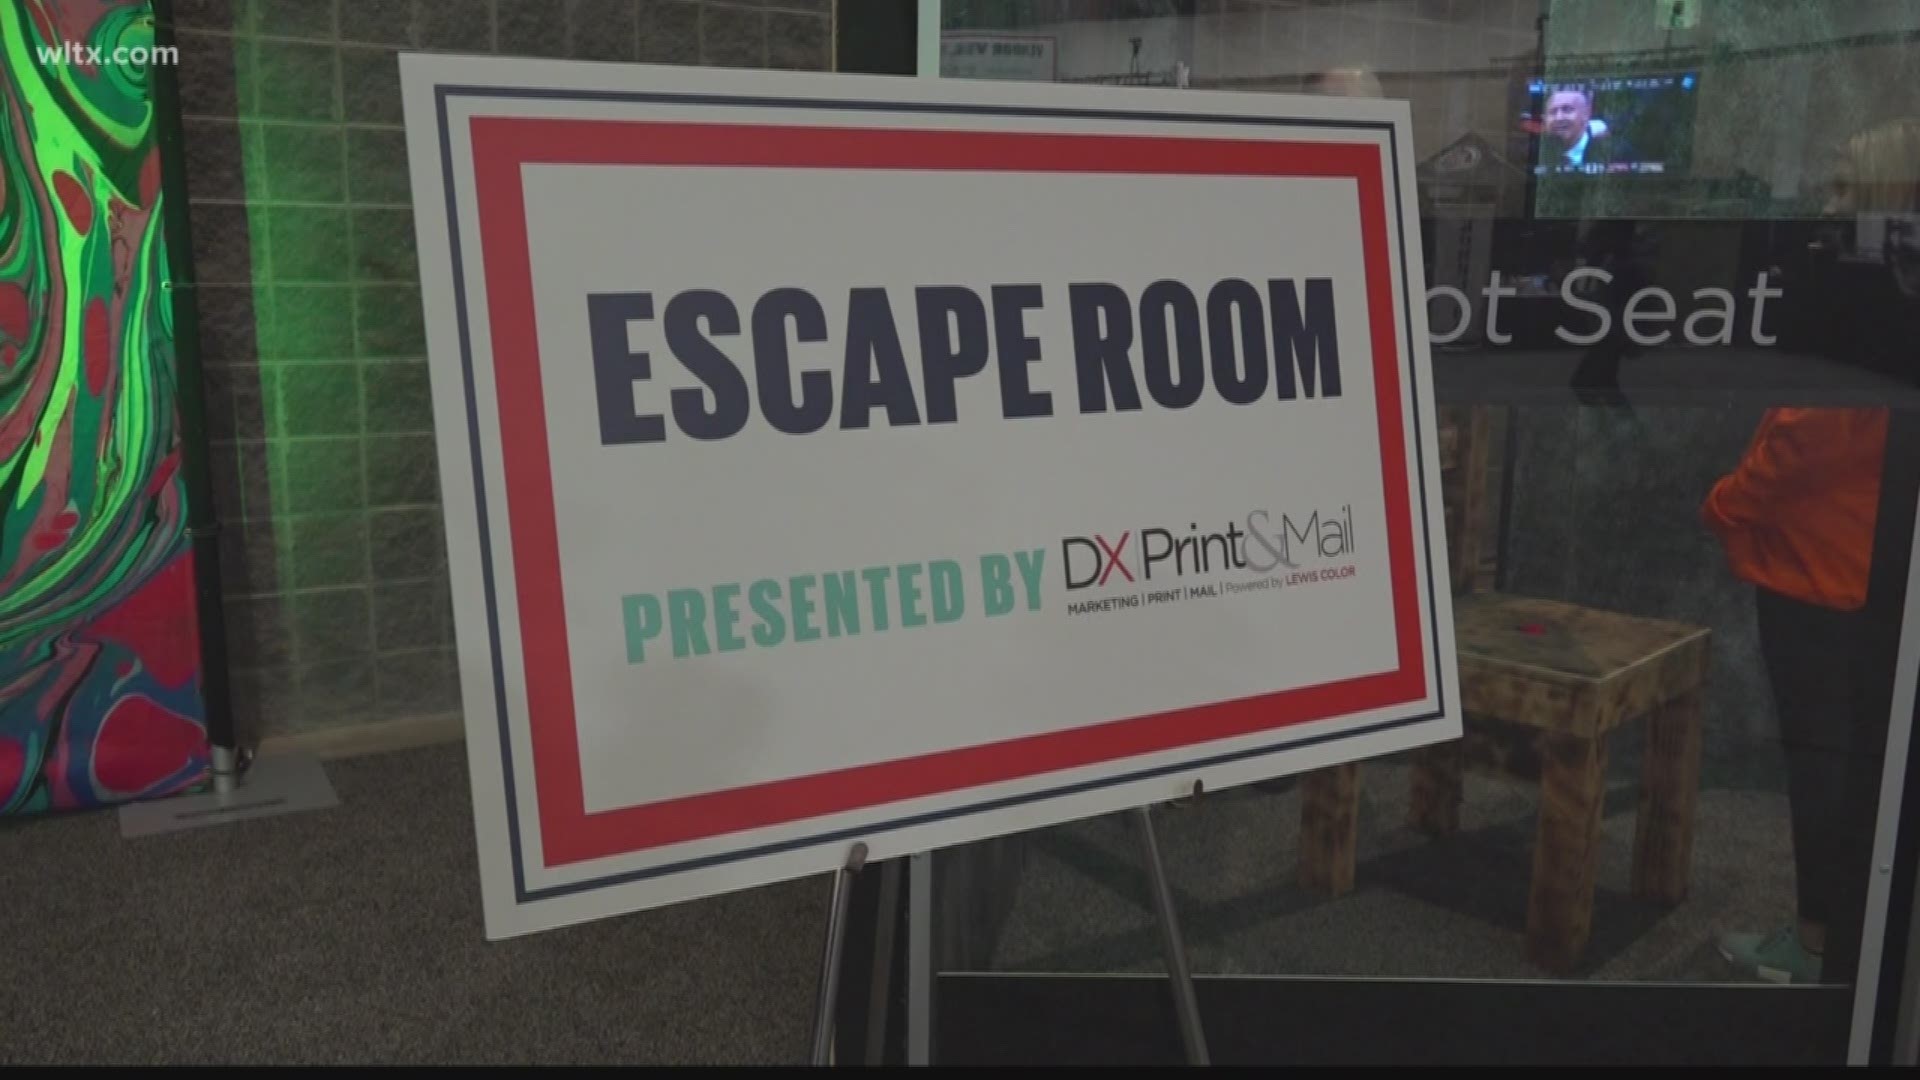 Basketball fans took a break from the hoops with a mobile escape room.